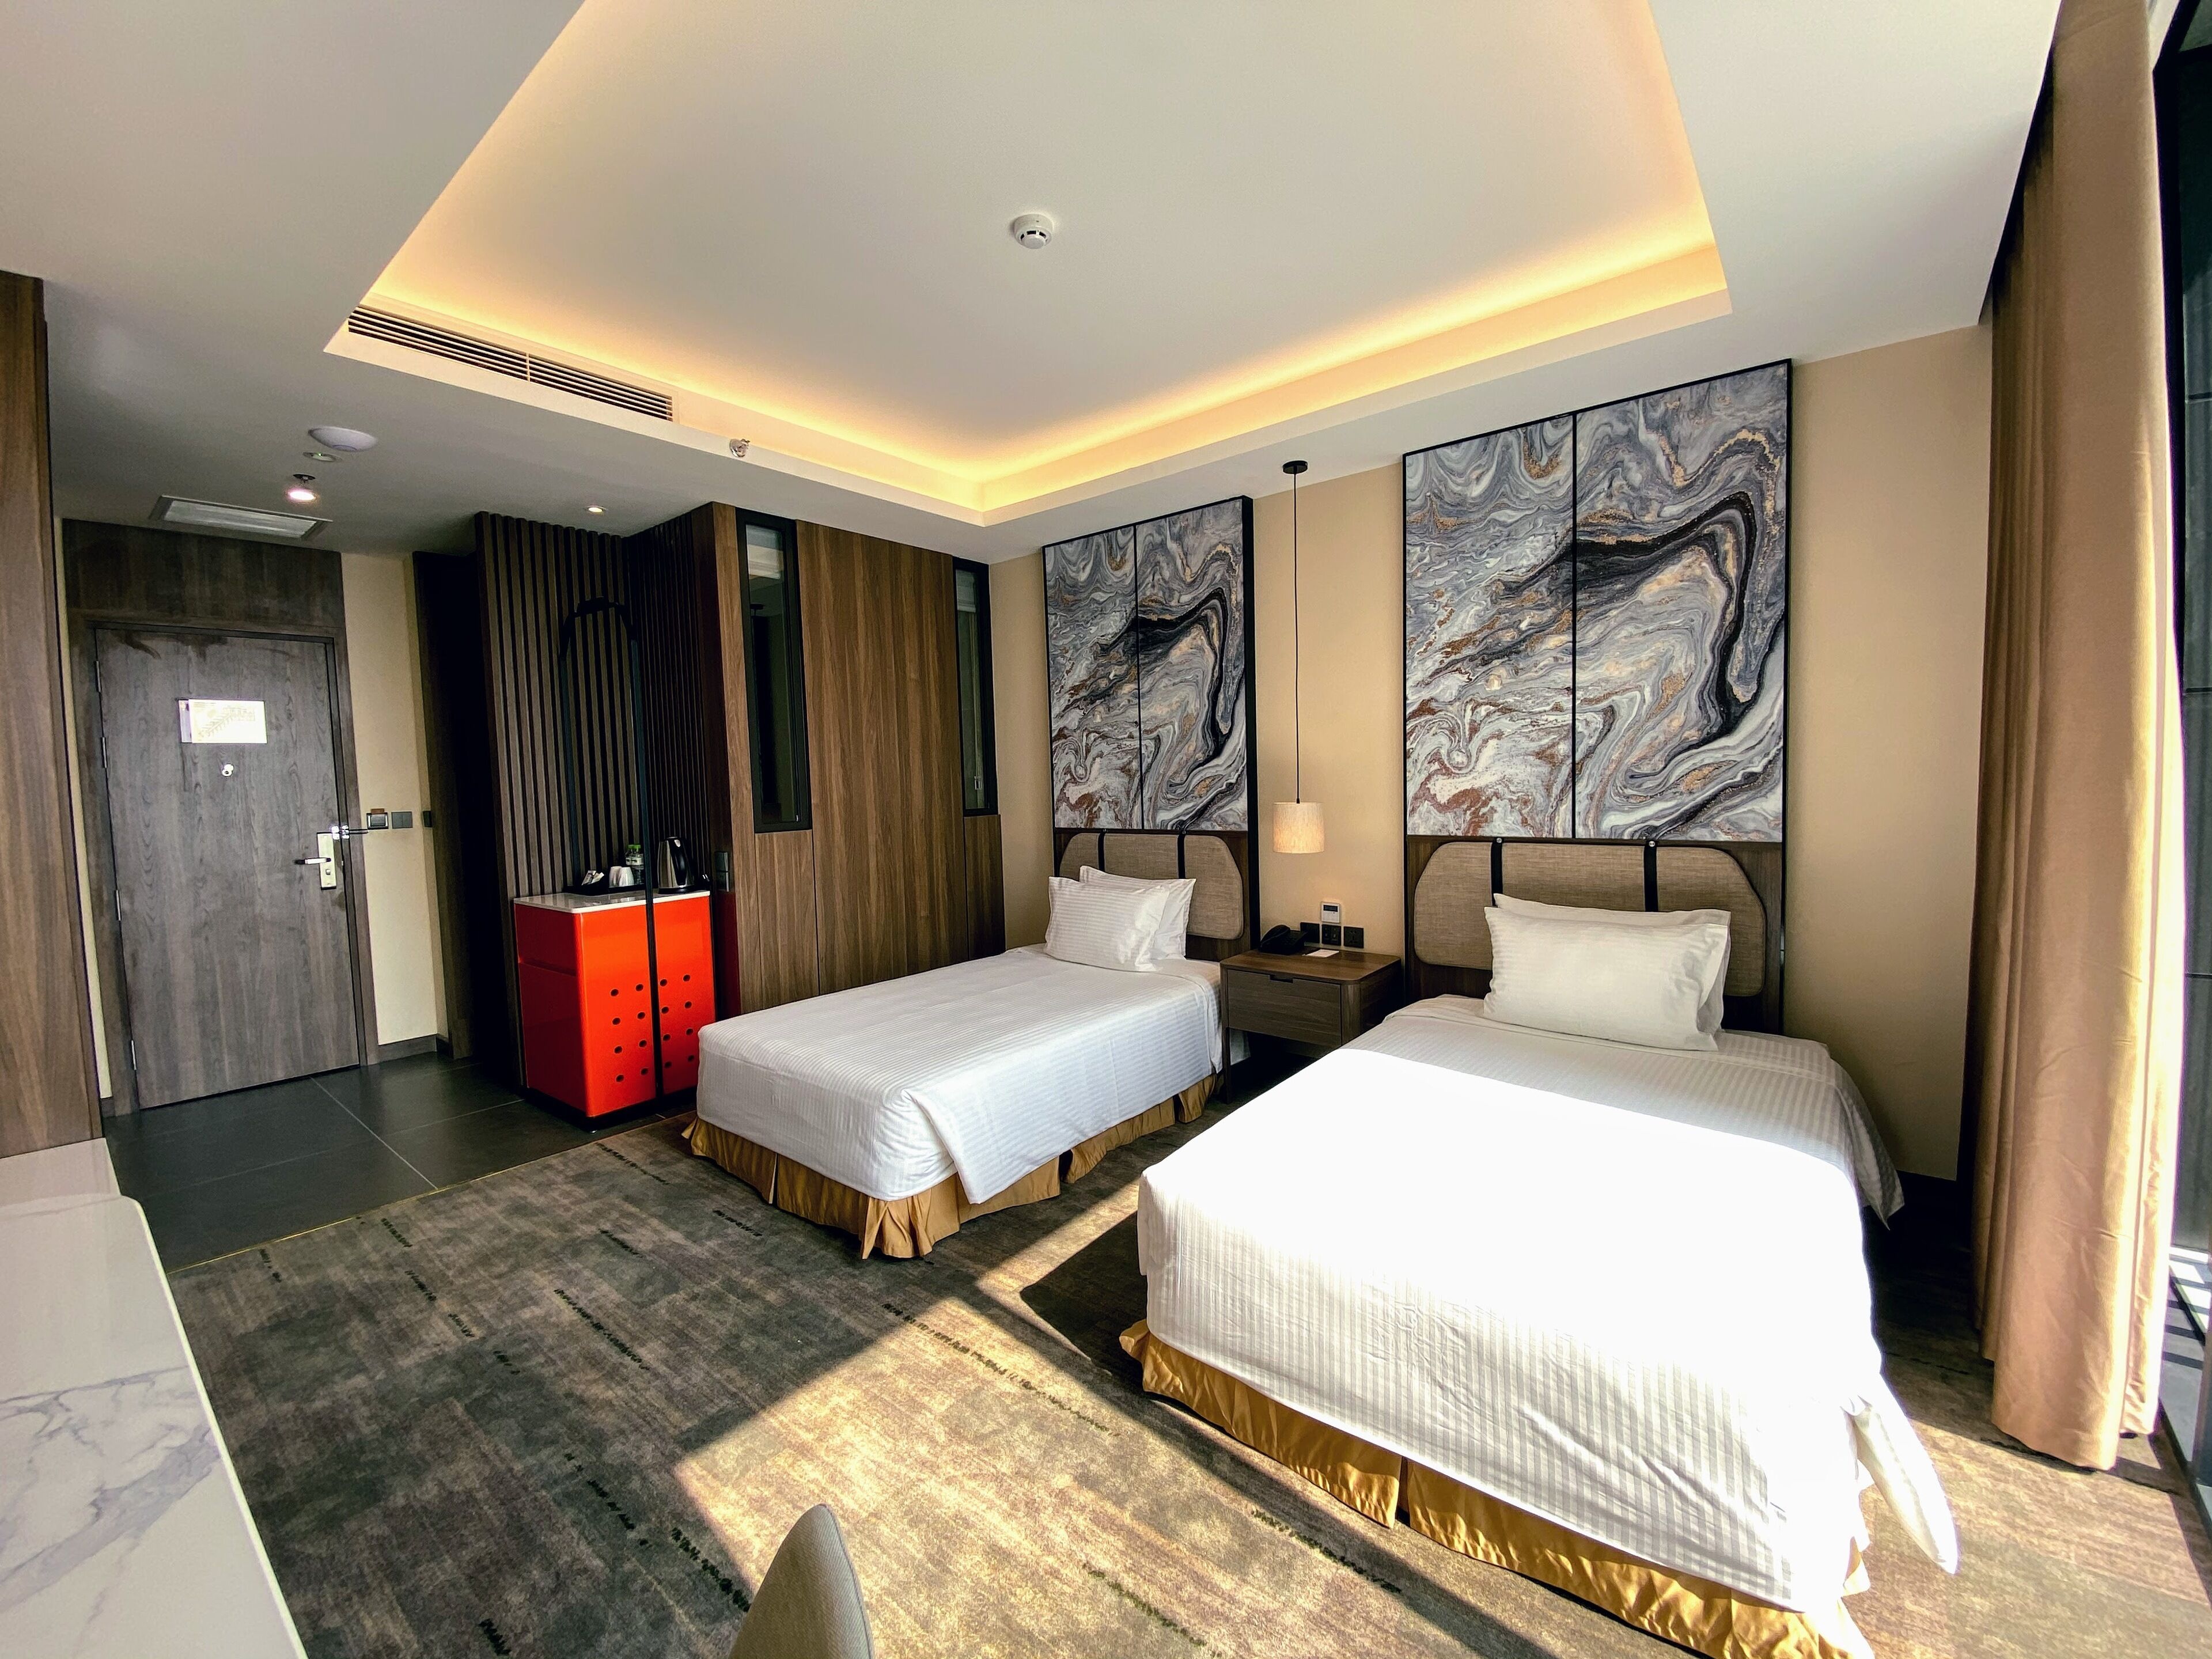 Muong Thanh Luxury Ha Long Centre Hotel